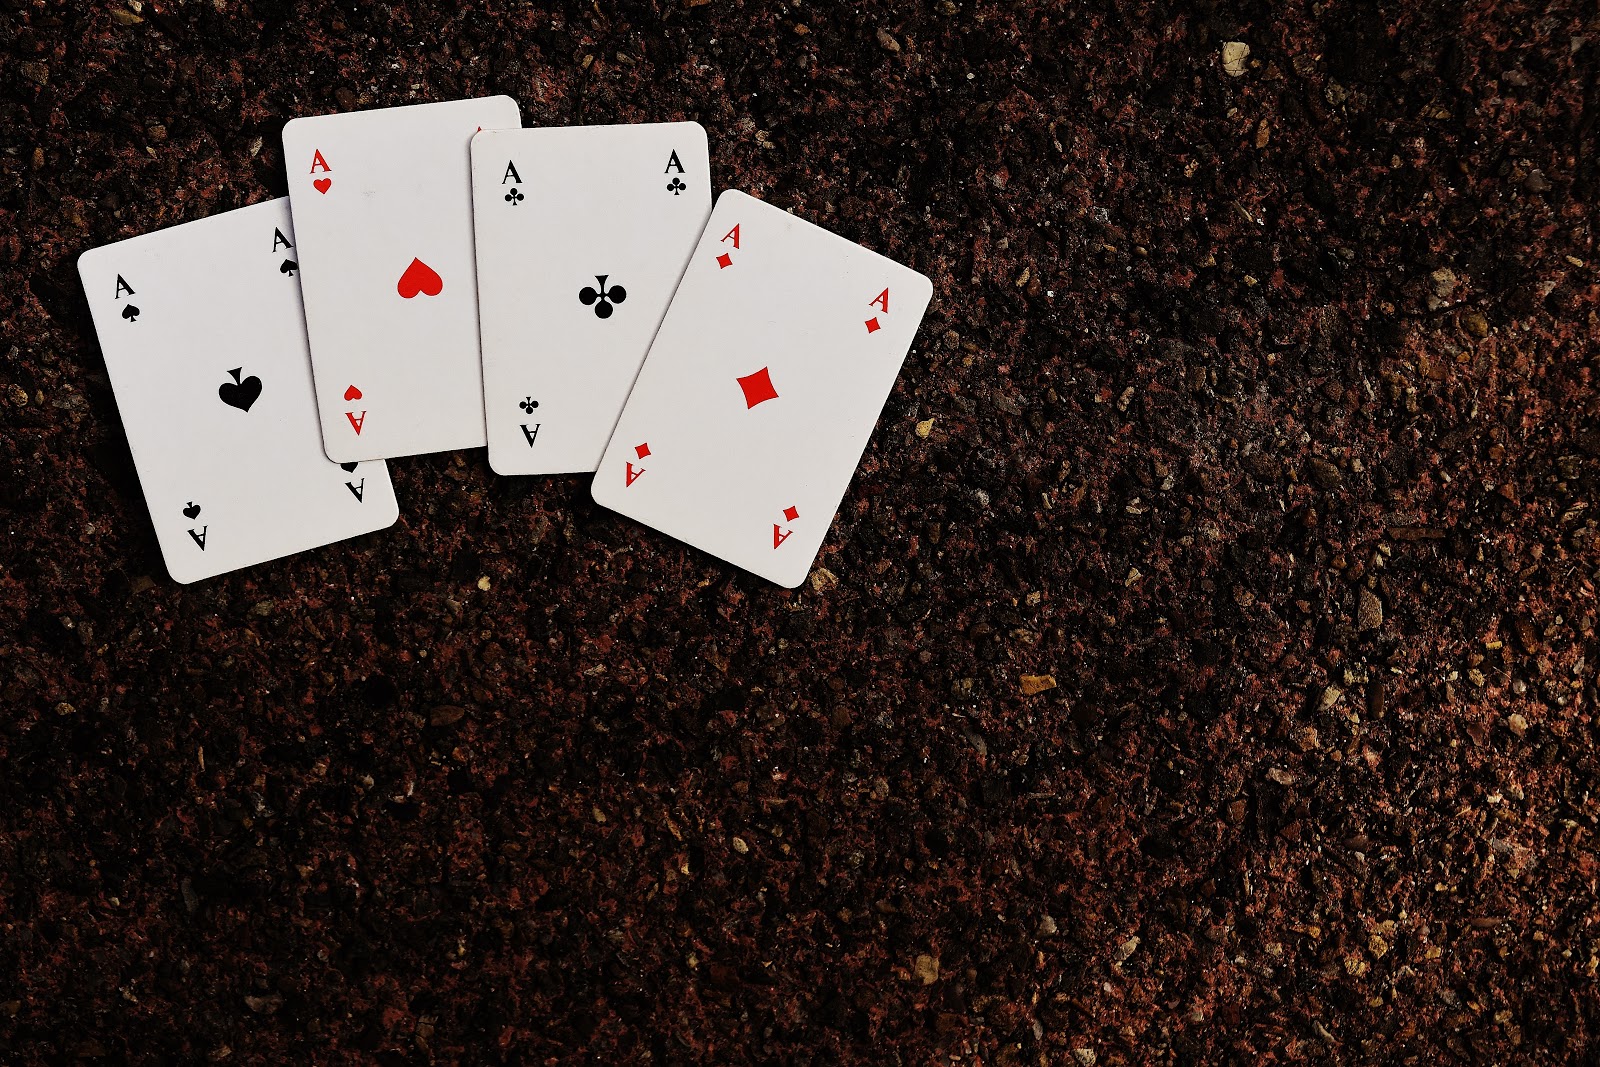 Four ace playing cards lying on brown ground made up of dirt and pebbles